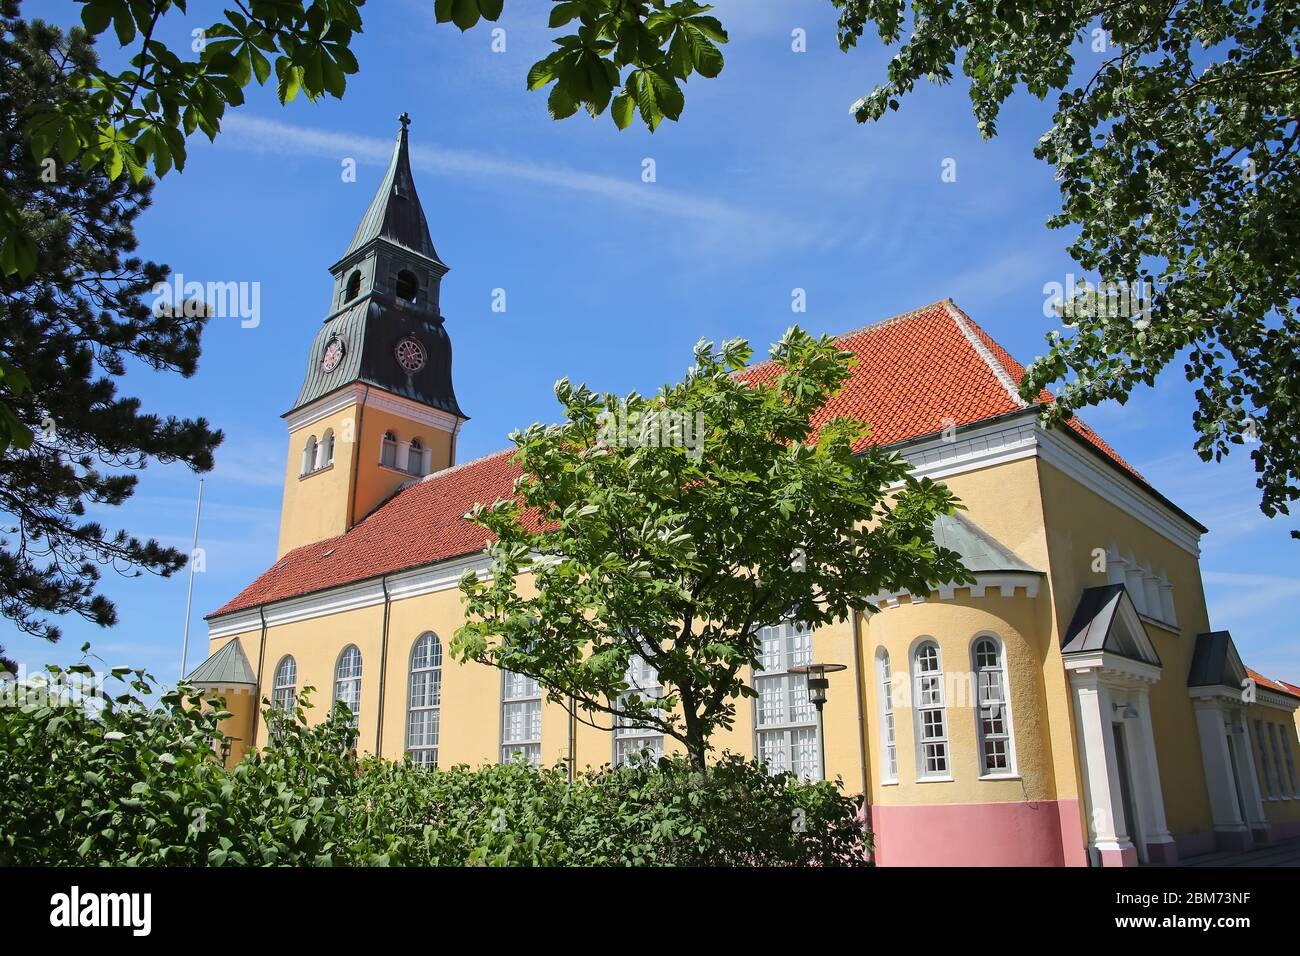 Skagen Church is a church located in the historic town centre of Skagen; Denmark. It was built in 1841. Stock Photo